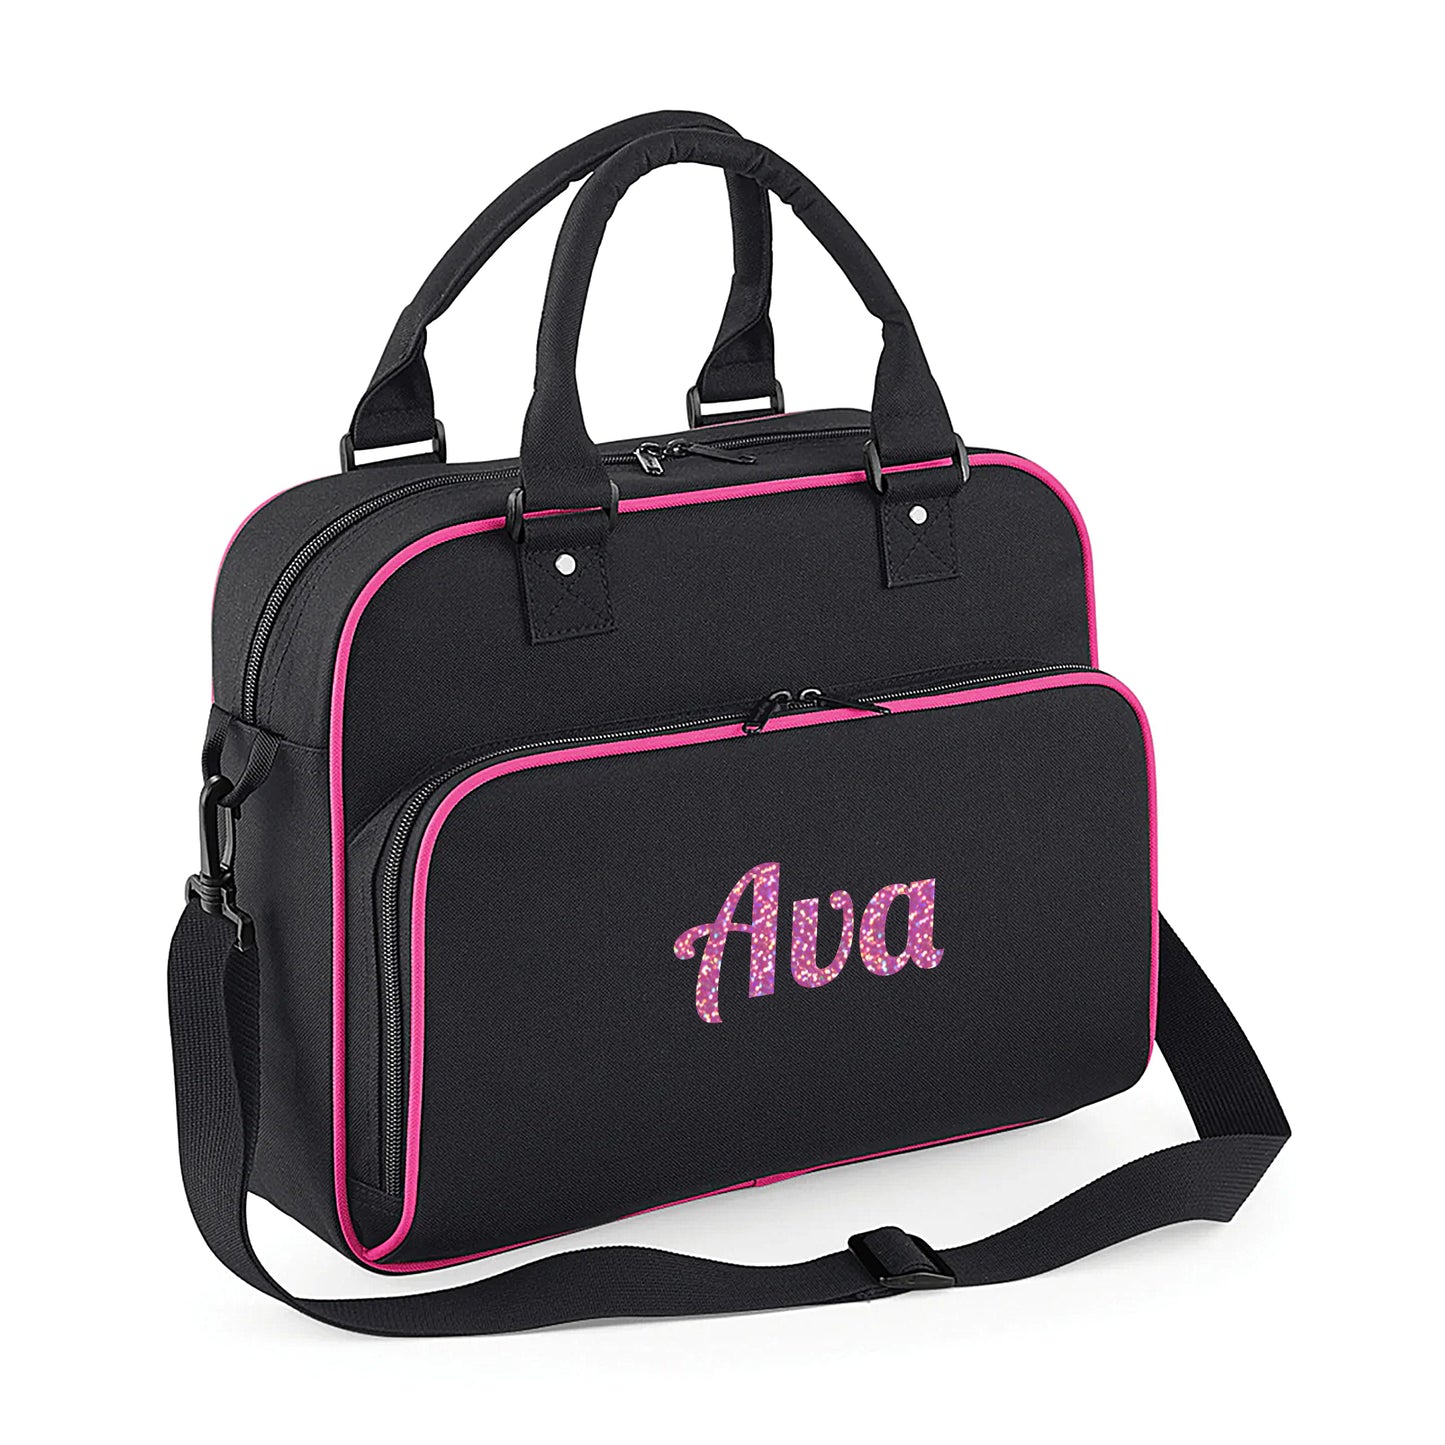 Personalised Girls Sports Bag with Name Dancing Swimming Gymnastic School Gym Bag  - Always Looking Good - Black with Pink Piping Name Only 